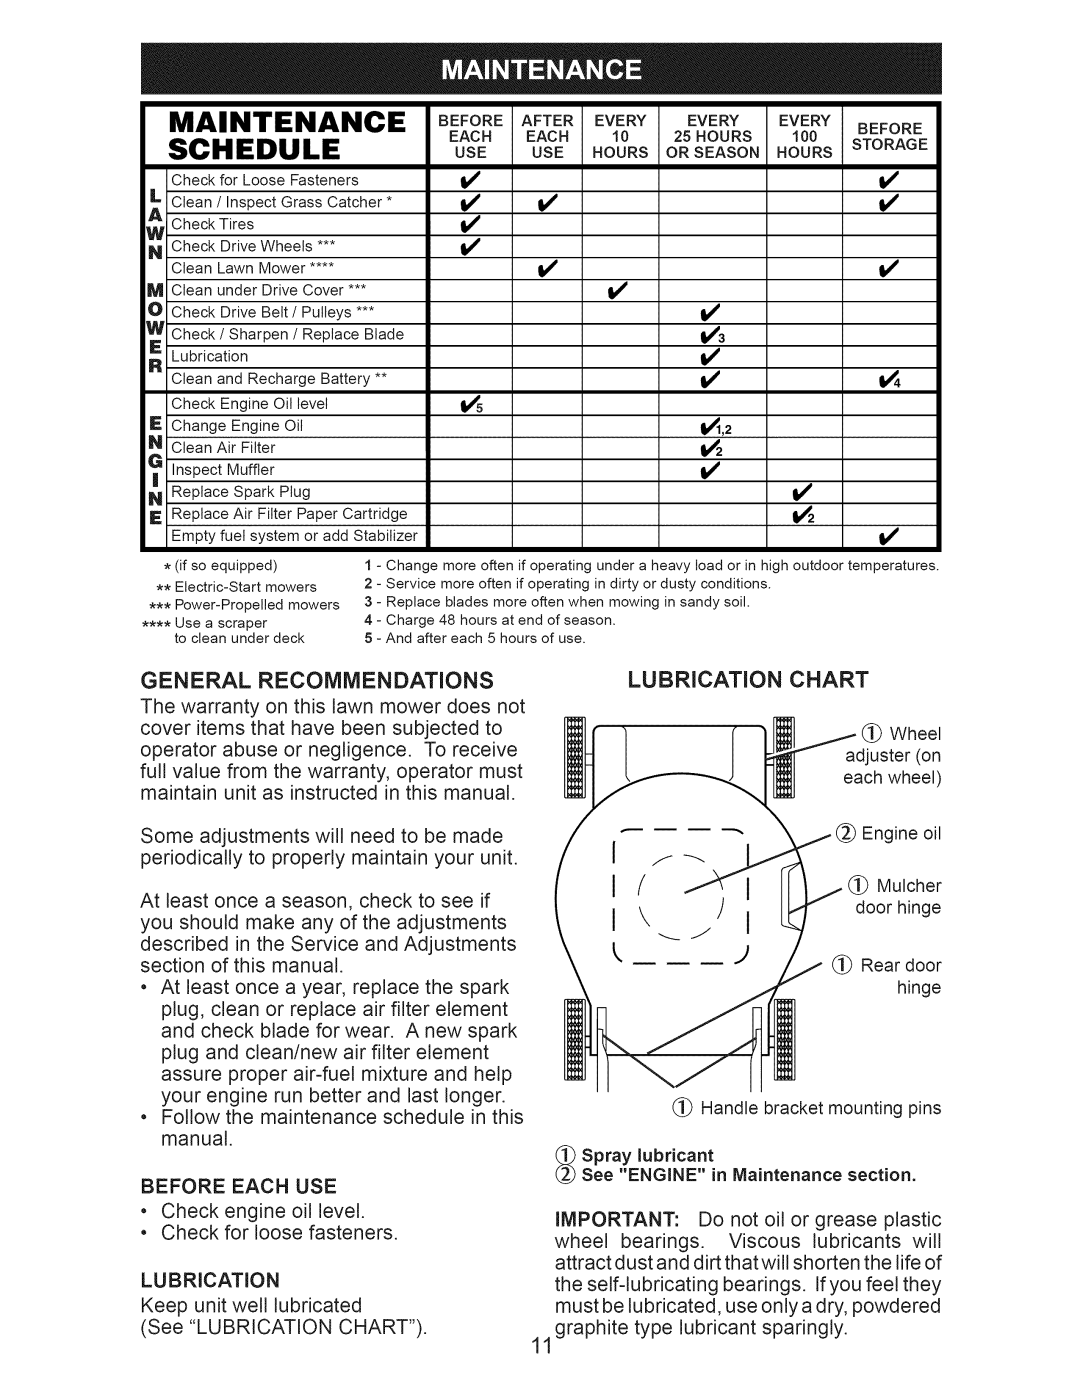 Craftsman 917.389061 owner manual Maintenance, Schedule, Use Hours 